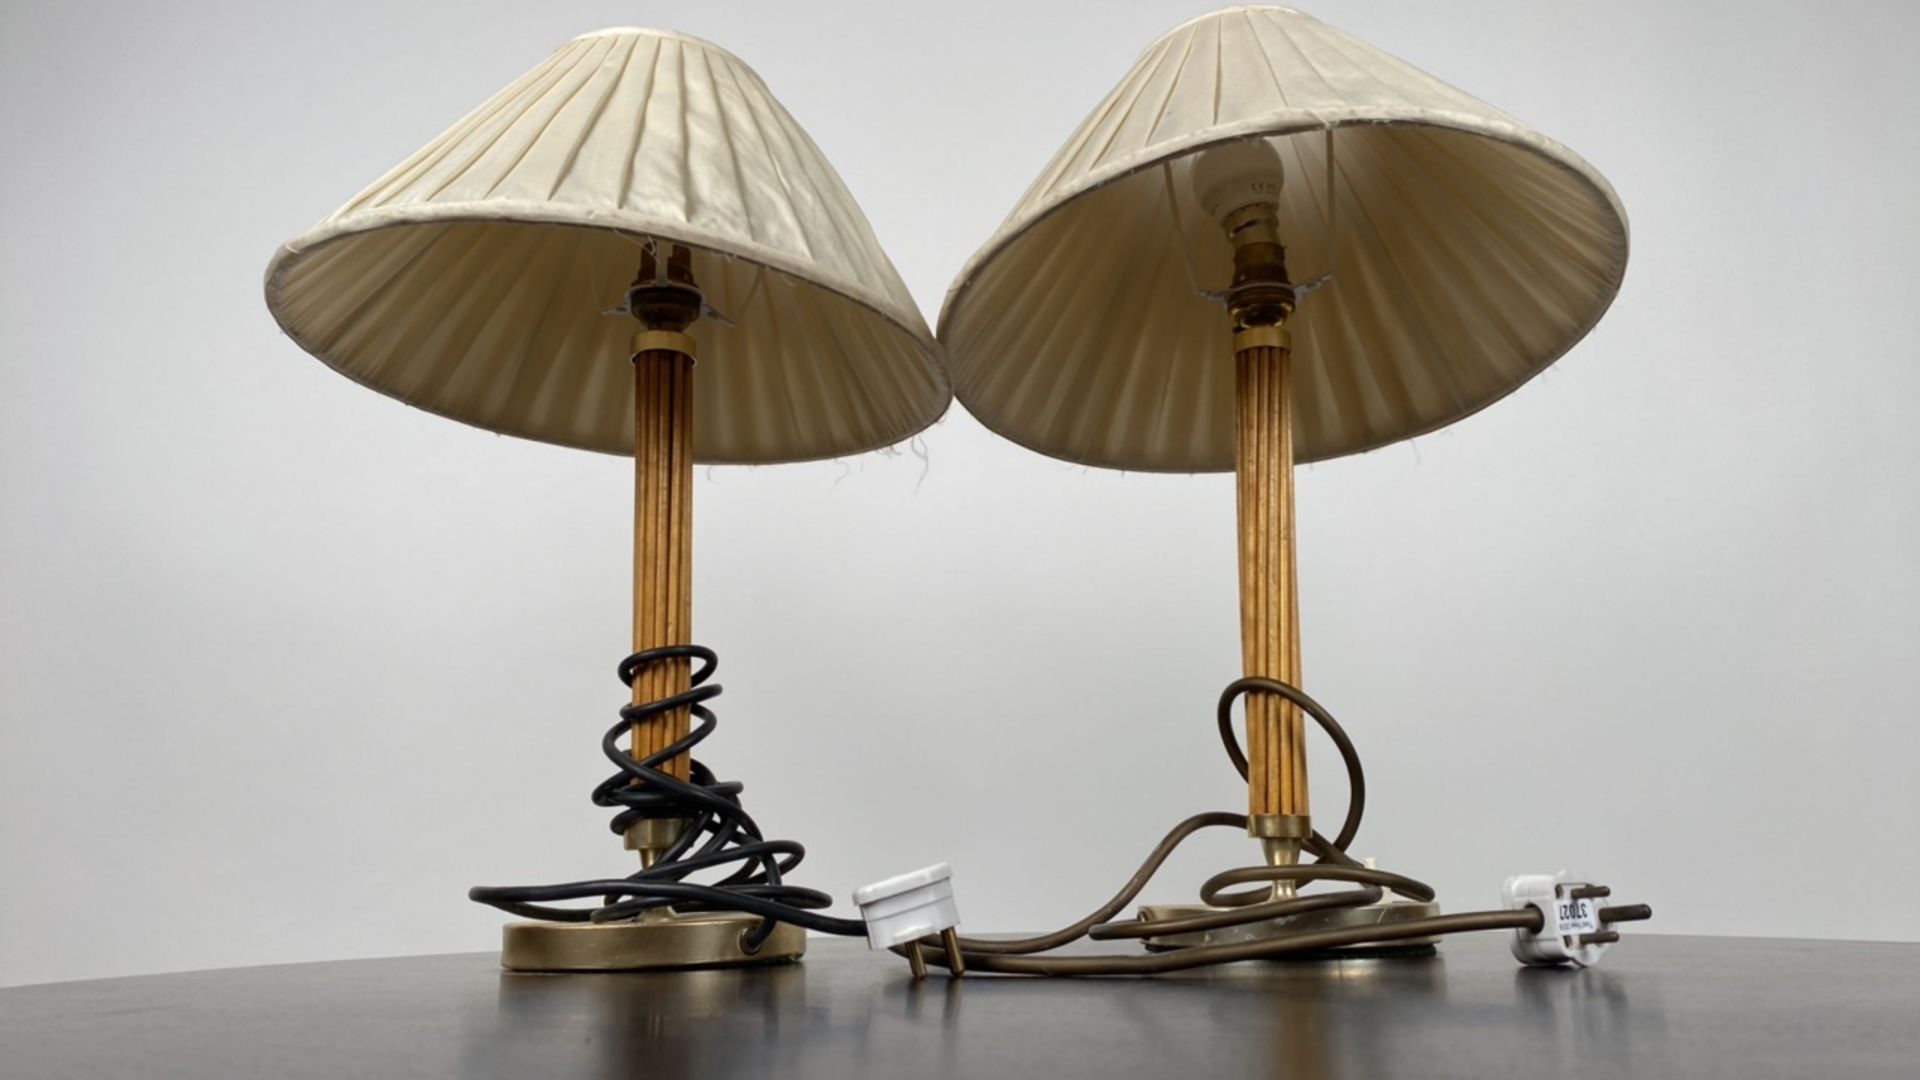 Pair of Bamboo Stem Table Lamps - Image 3 of 4